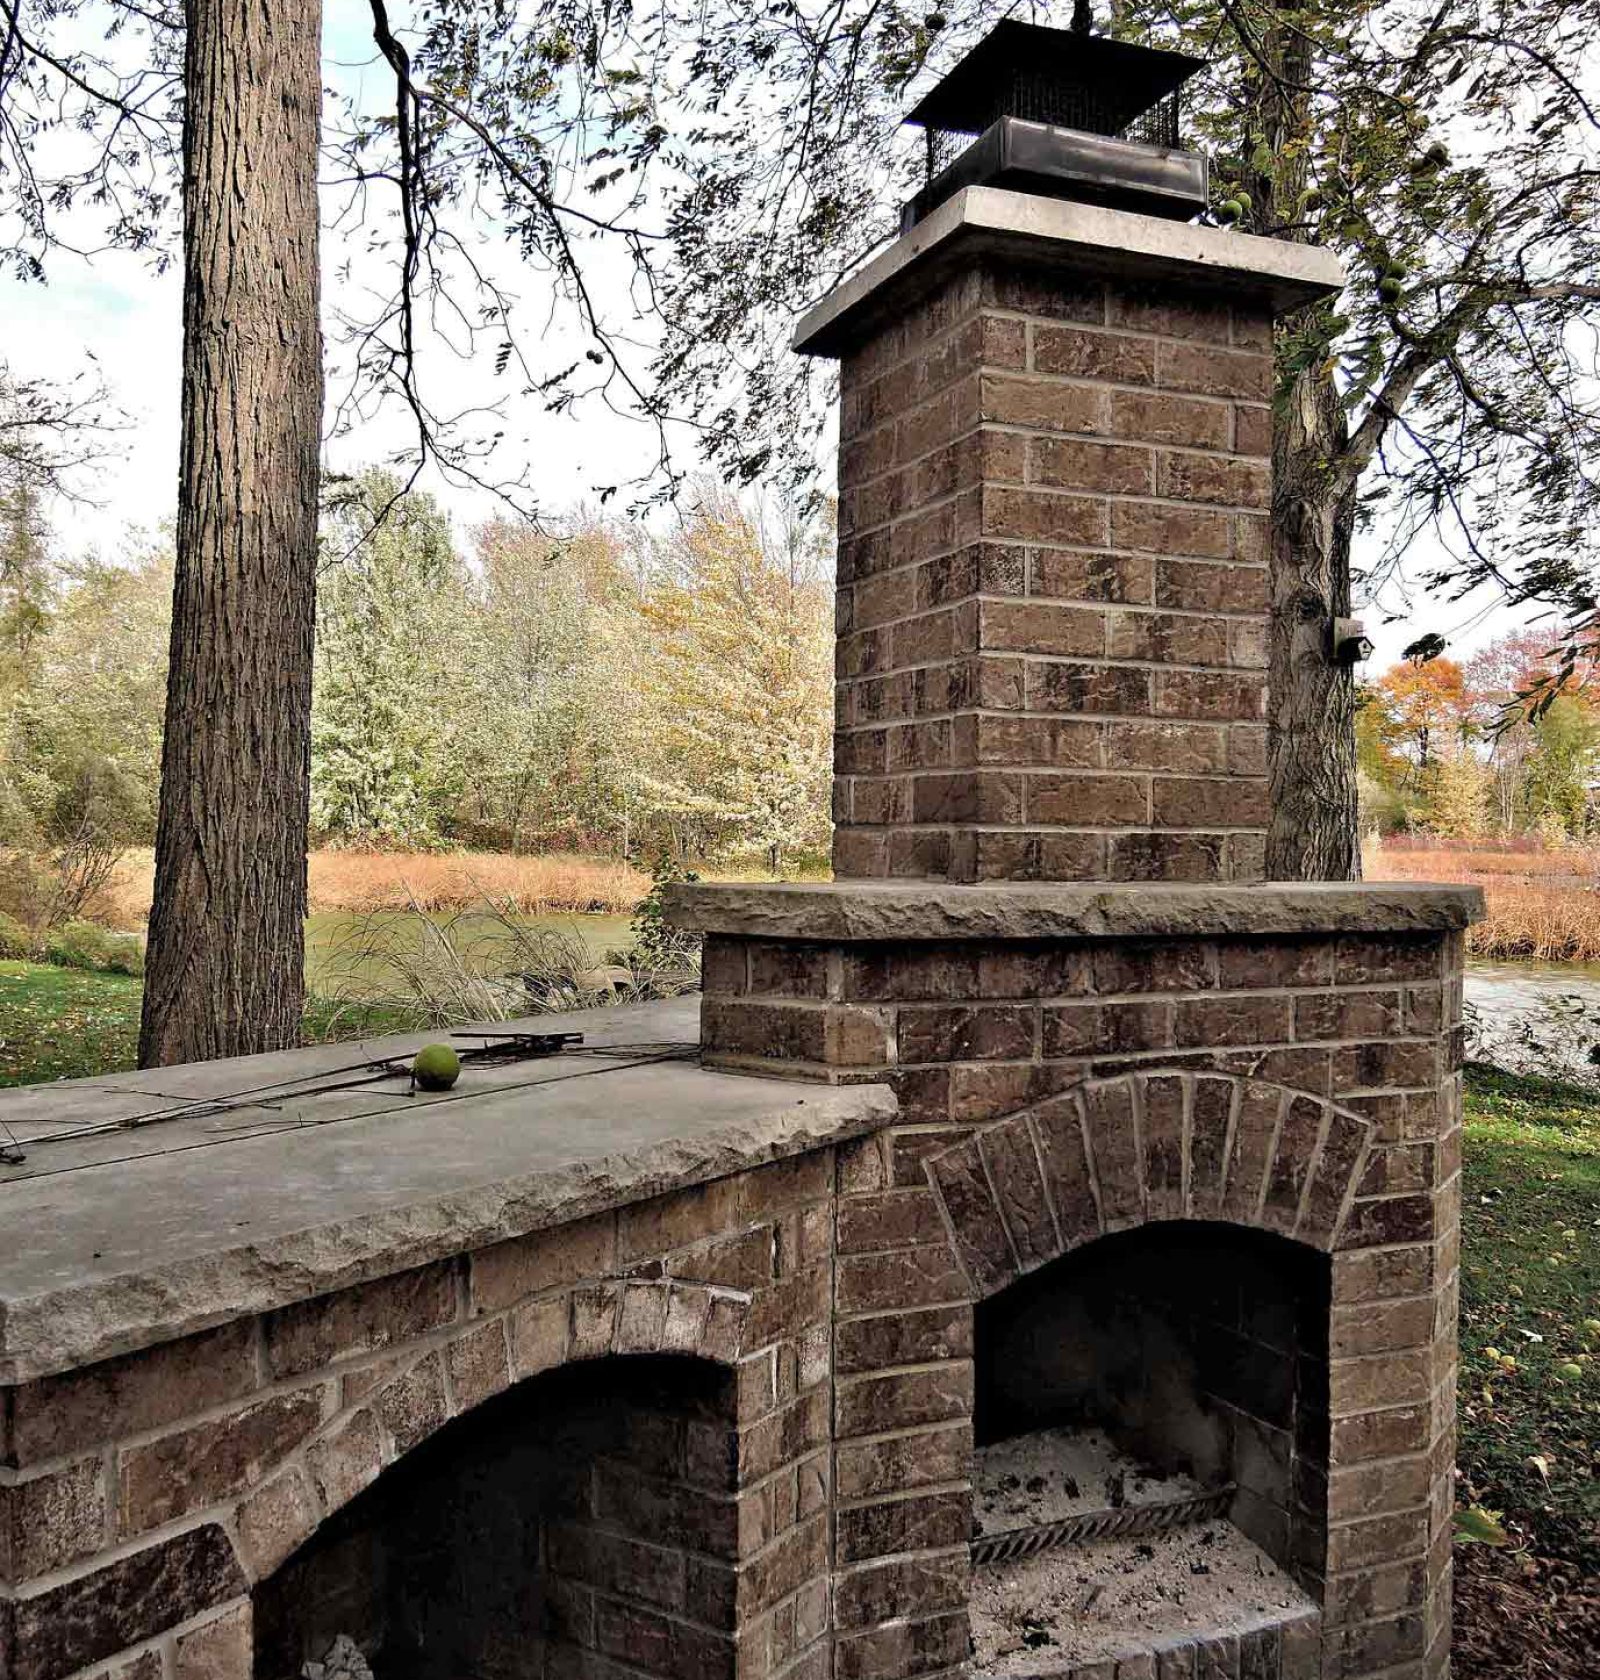 low-outdoor-fireplace-991850_1920